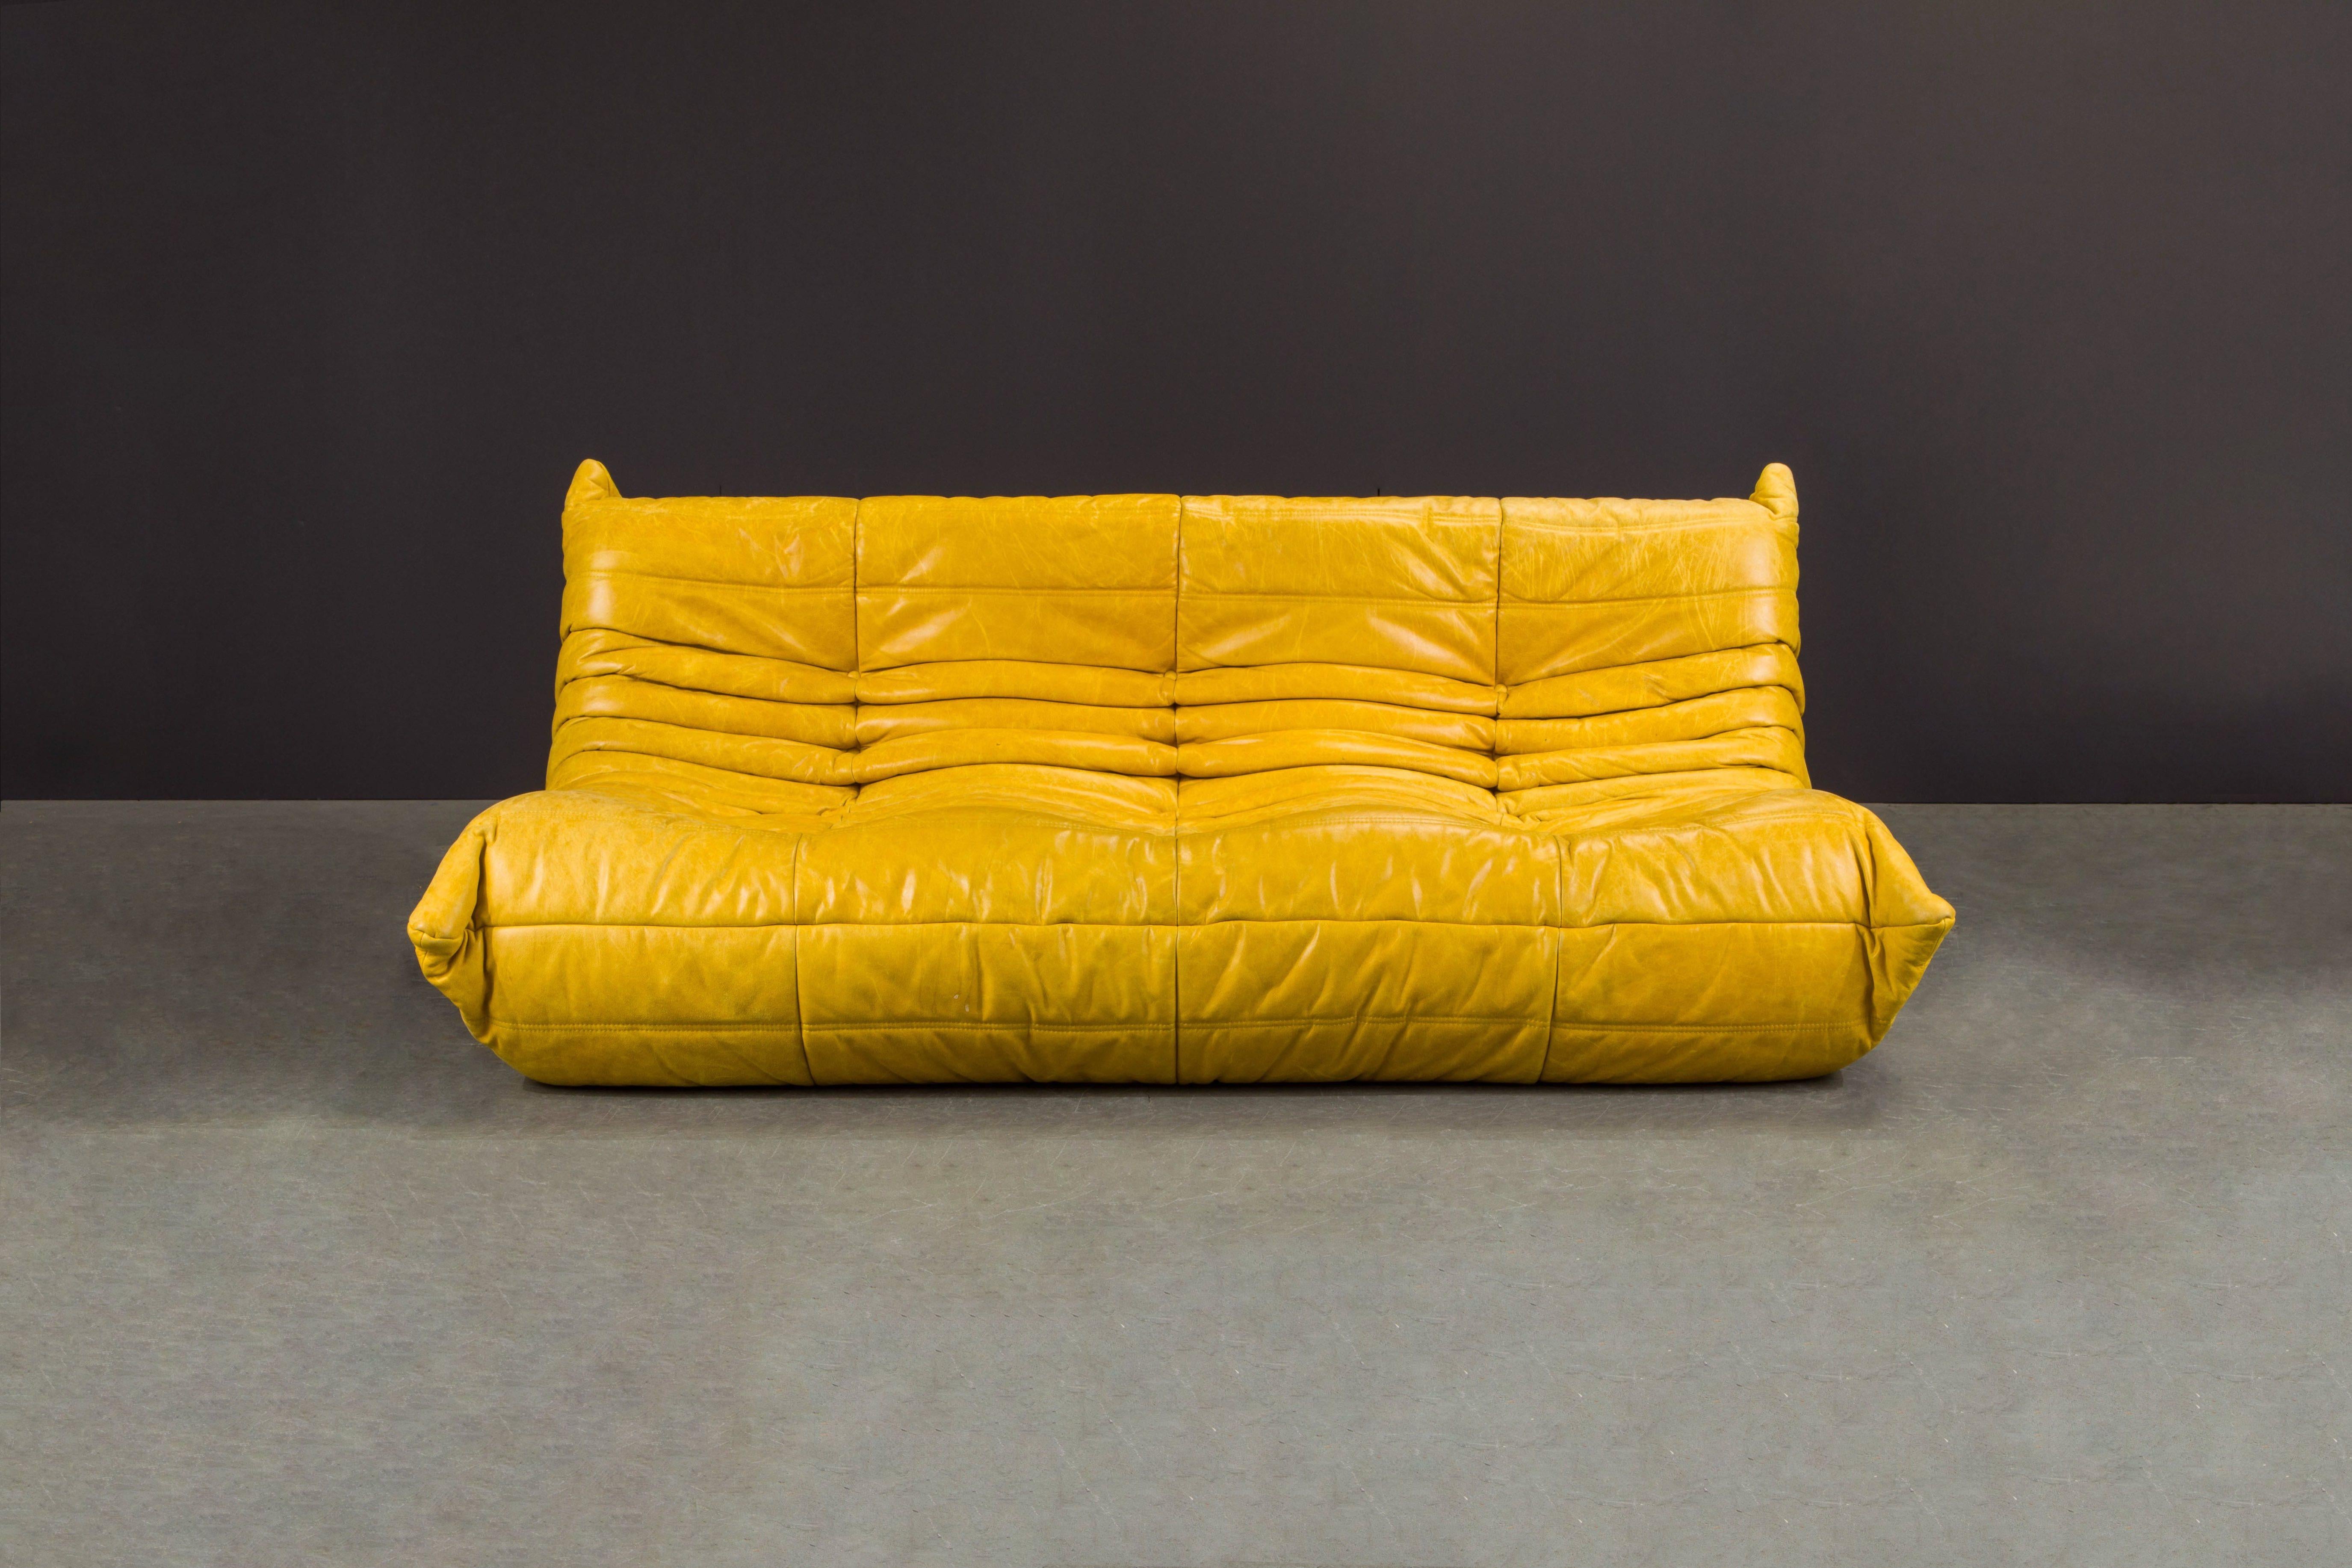 This gorgeous yellow leather 'Togo' three-seat sofa was designed by Michel Ducaroy in 1973 for Ligne Roset, France. Signed with Ligne Roset Made in France label and has the standard striped underside decking fabric which Ligne Roset uses. Originally